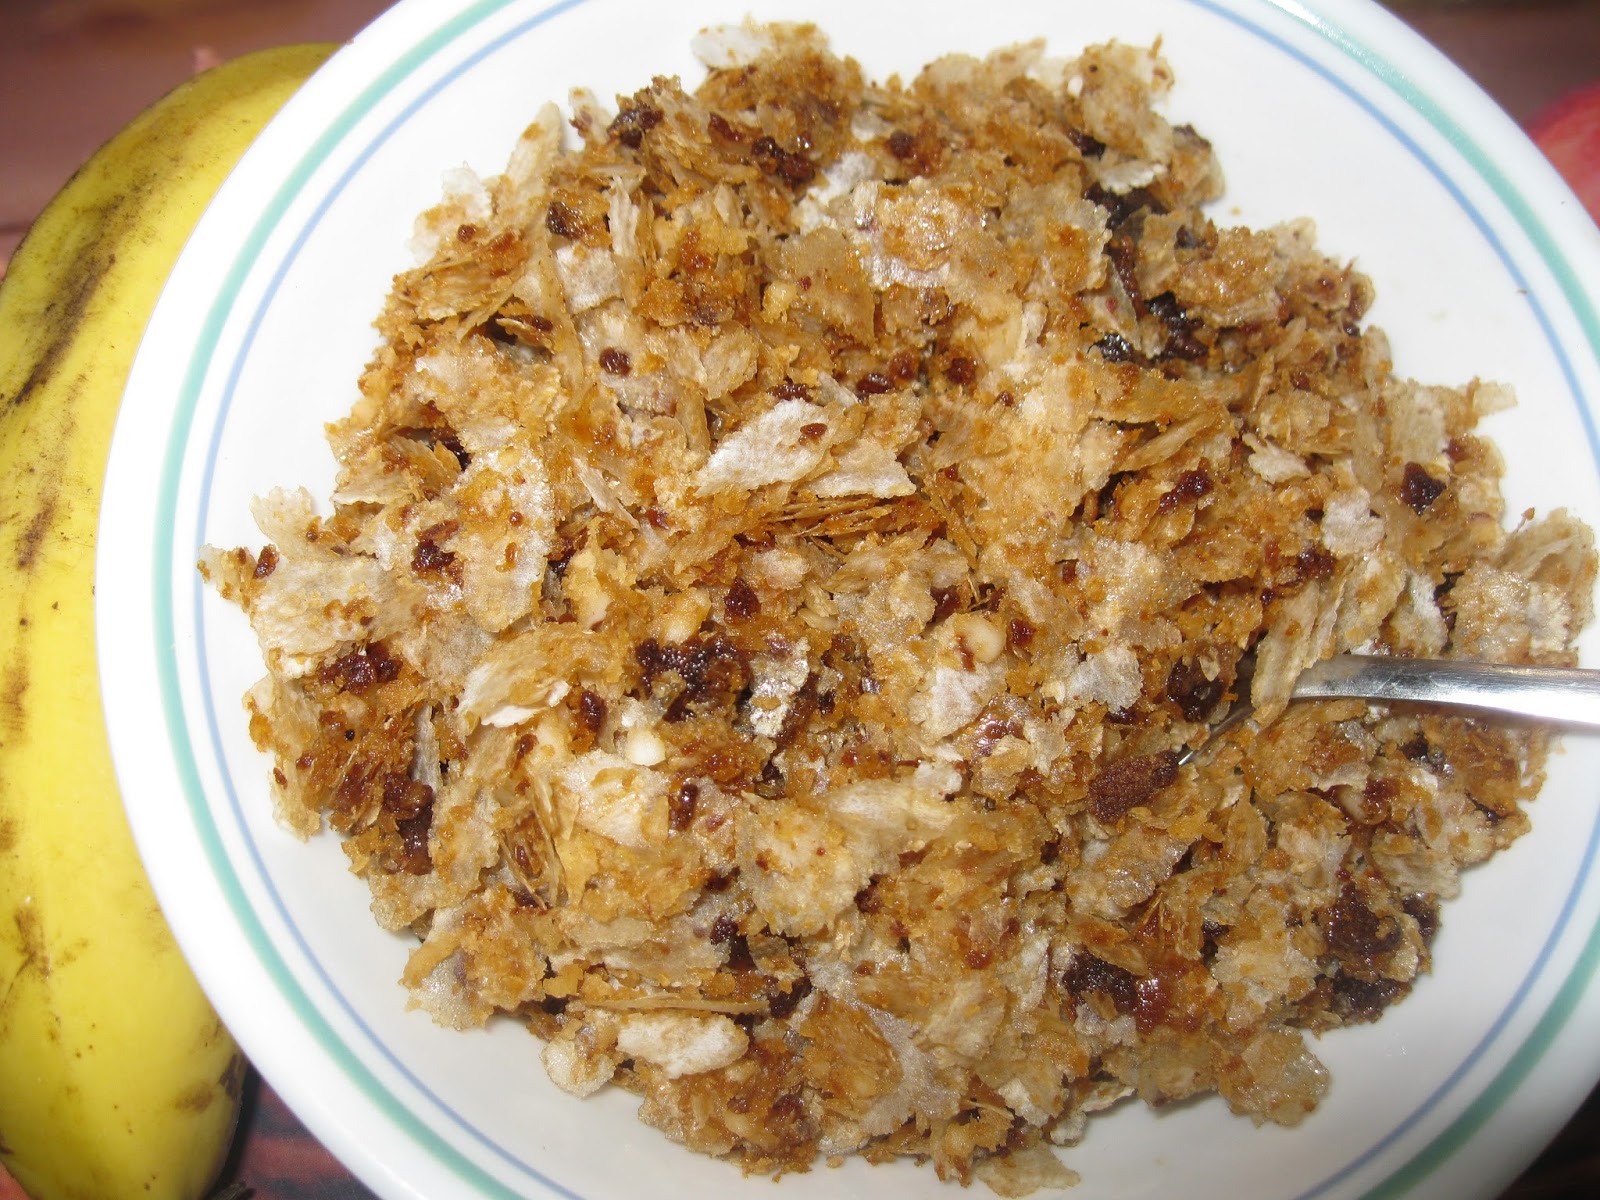 Aval Nanachathu (Beaten Rice with Coconut and Jaggery)